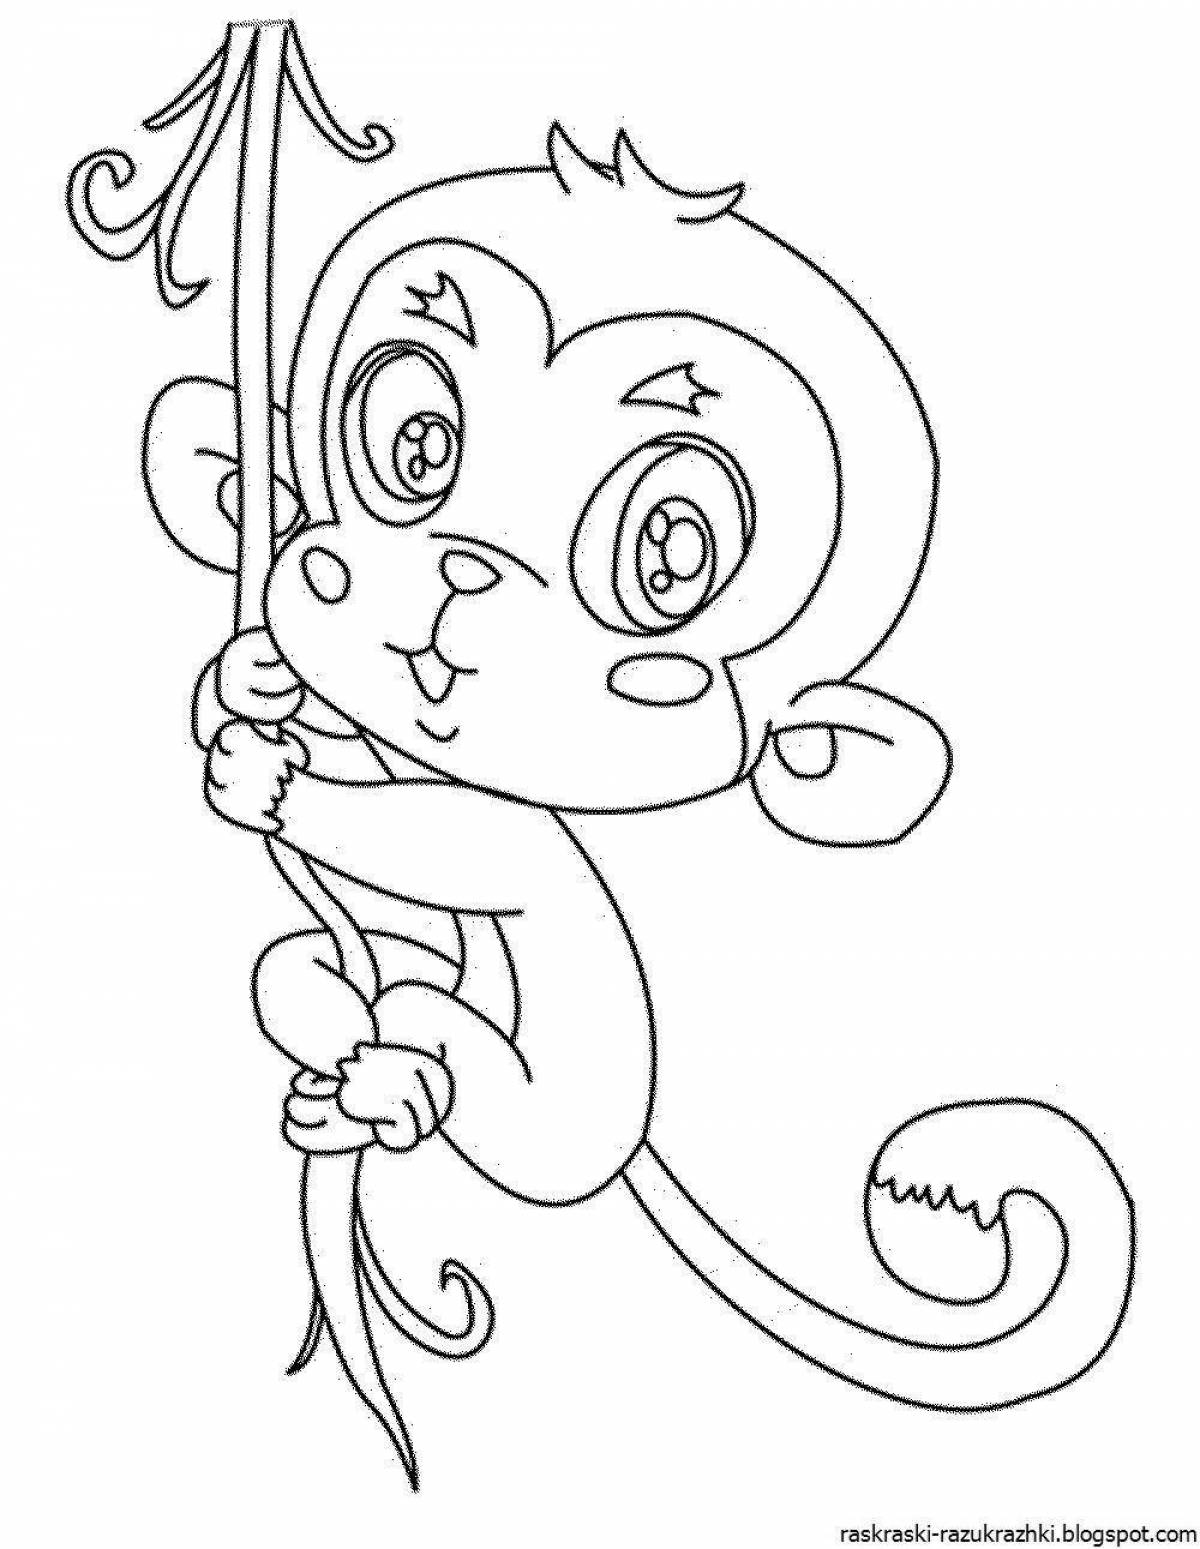 A live coloring monkey for children